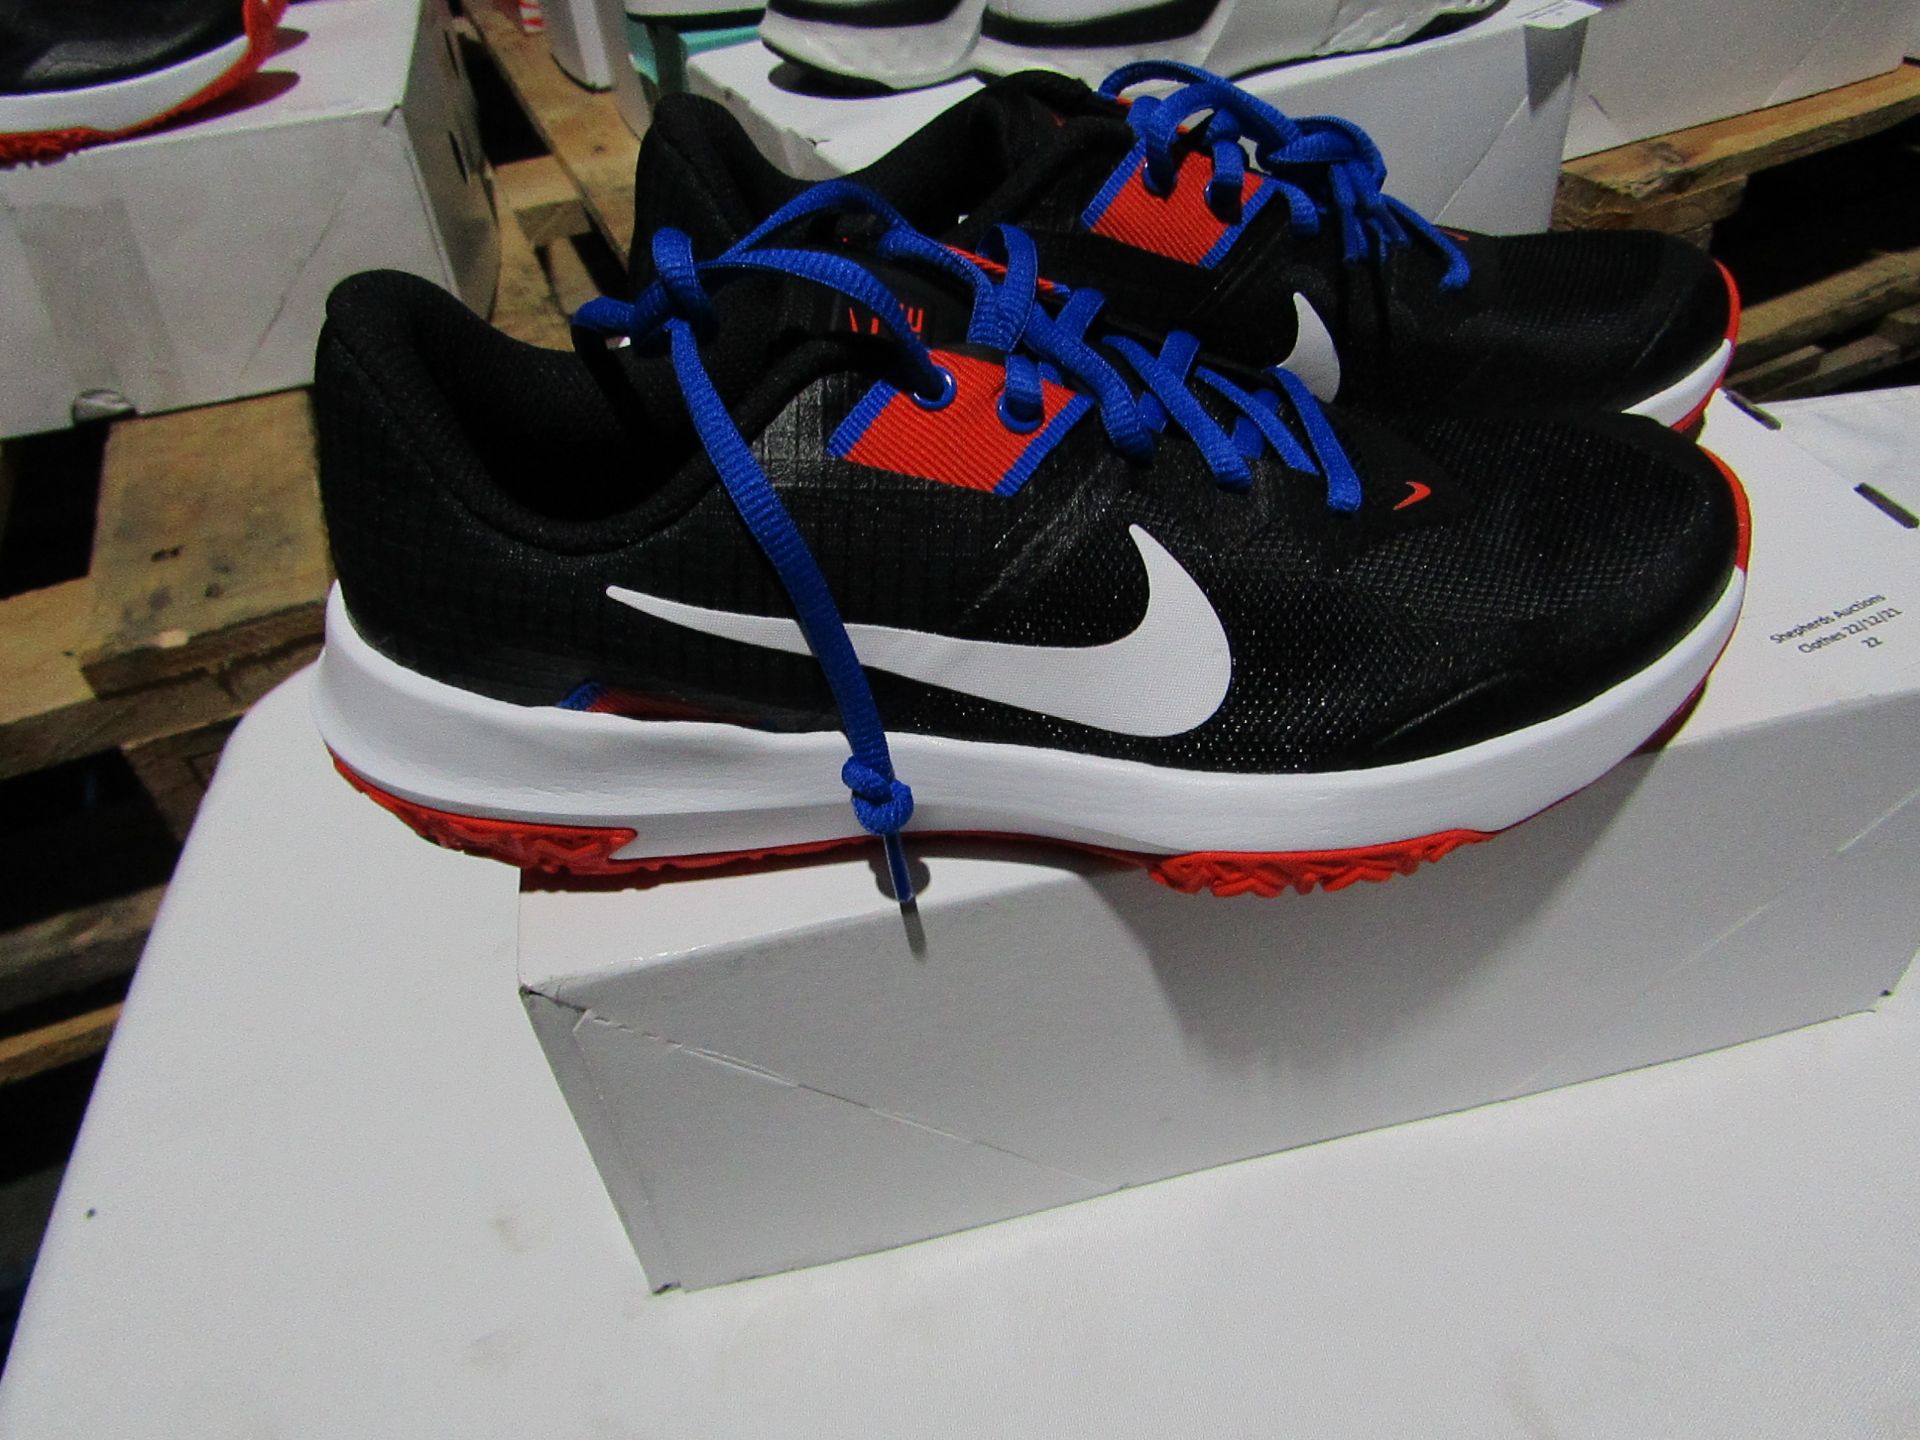 Nike Black and Orange running trainers, new and boxed, Size 8.5 Uk